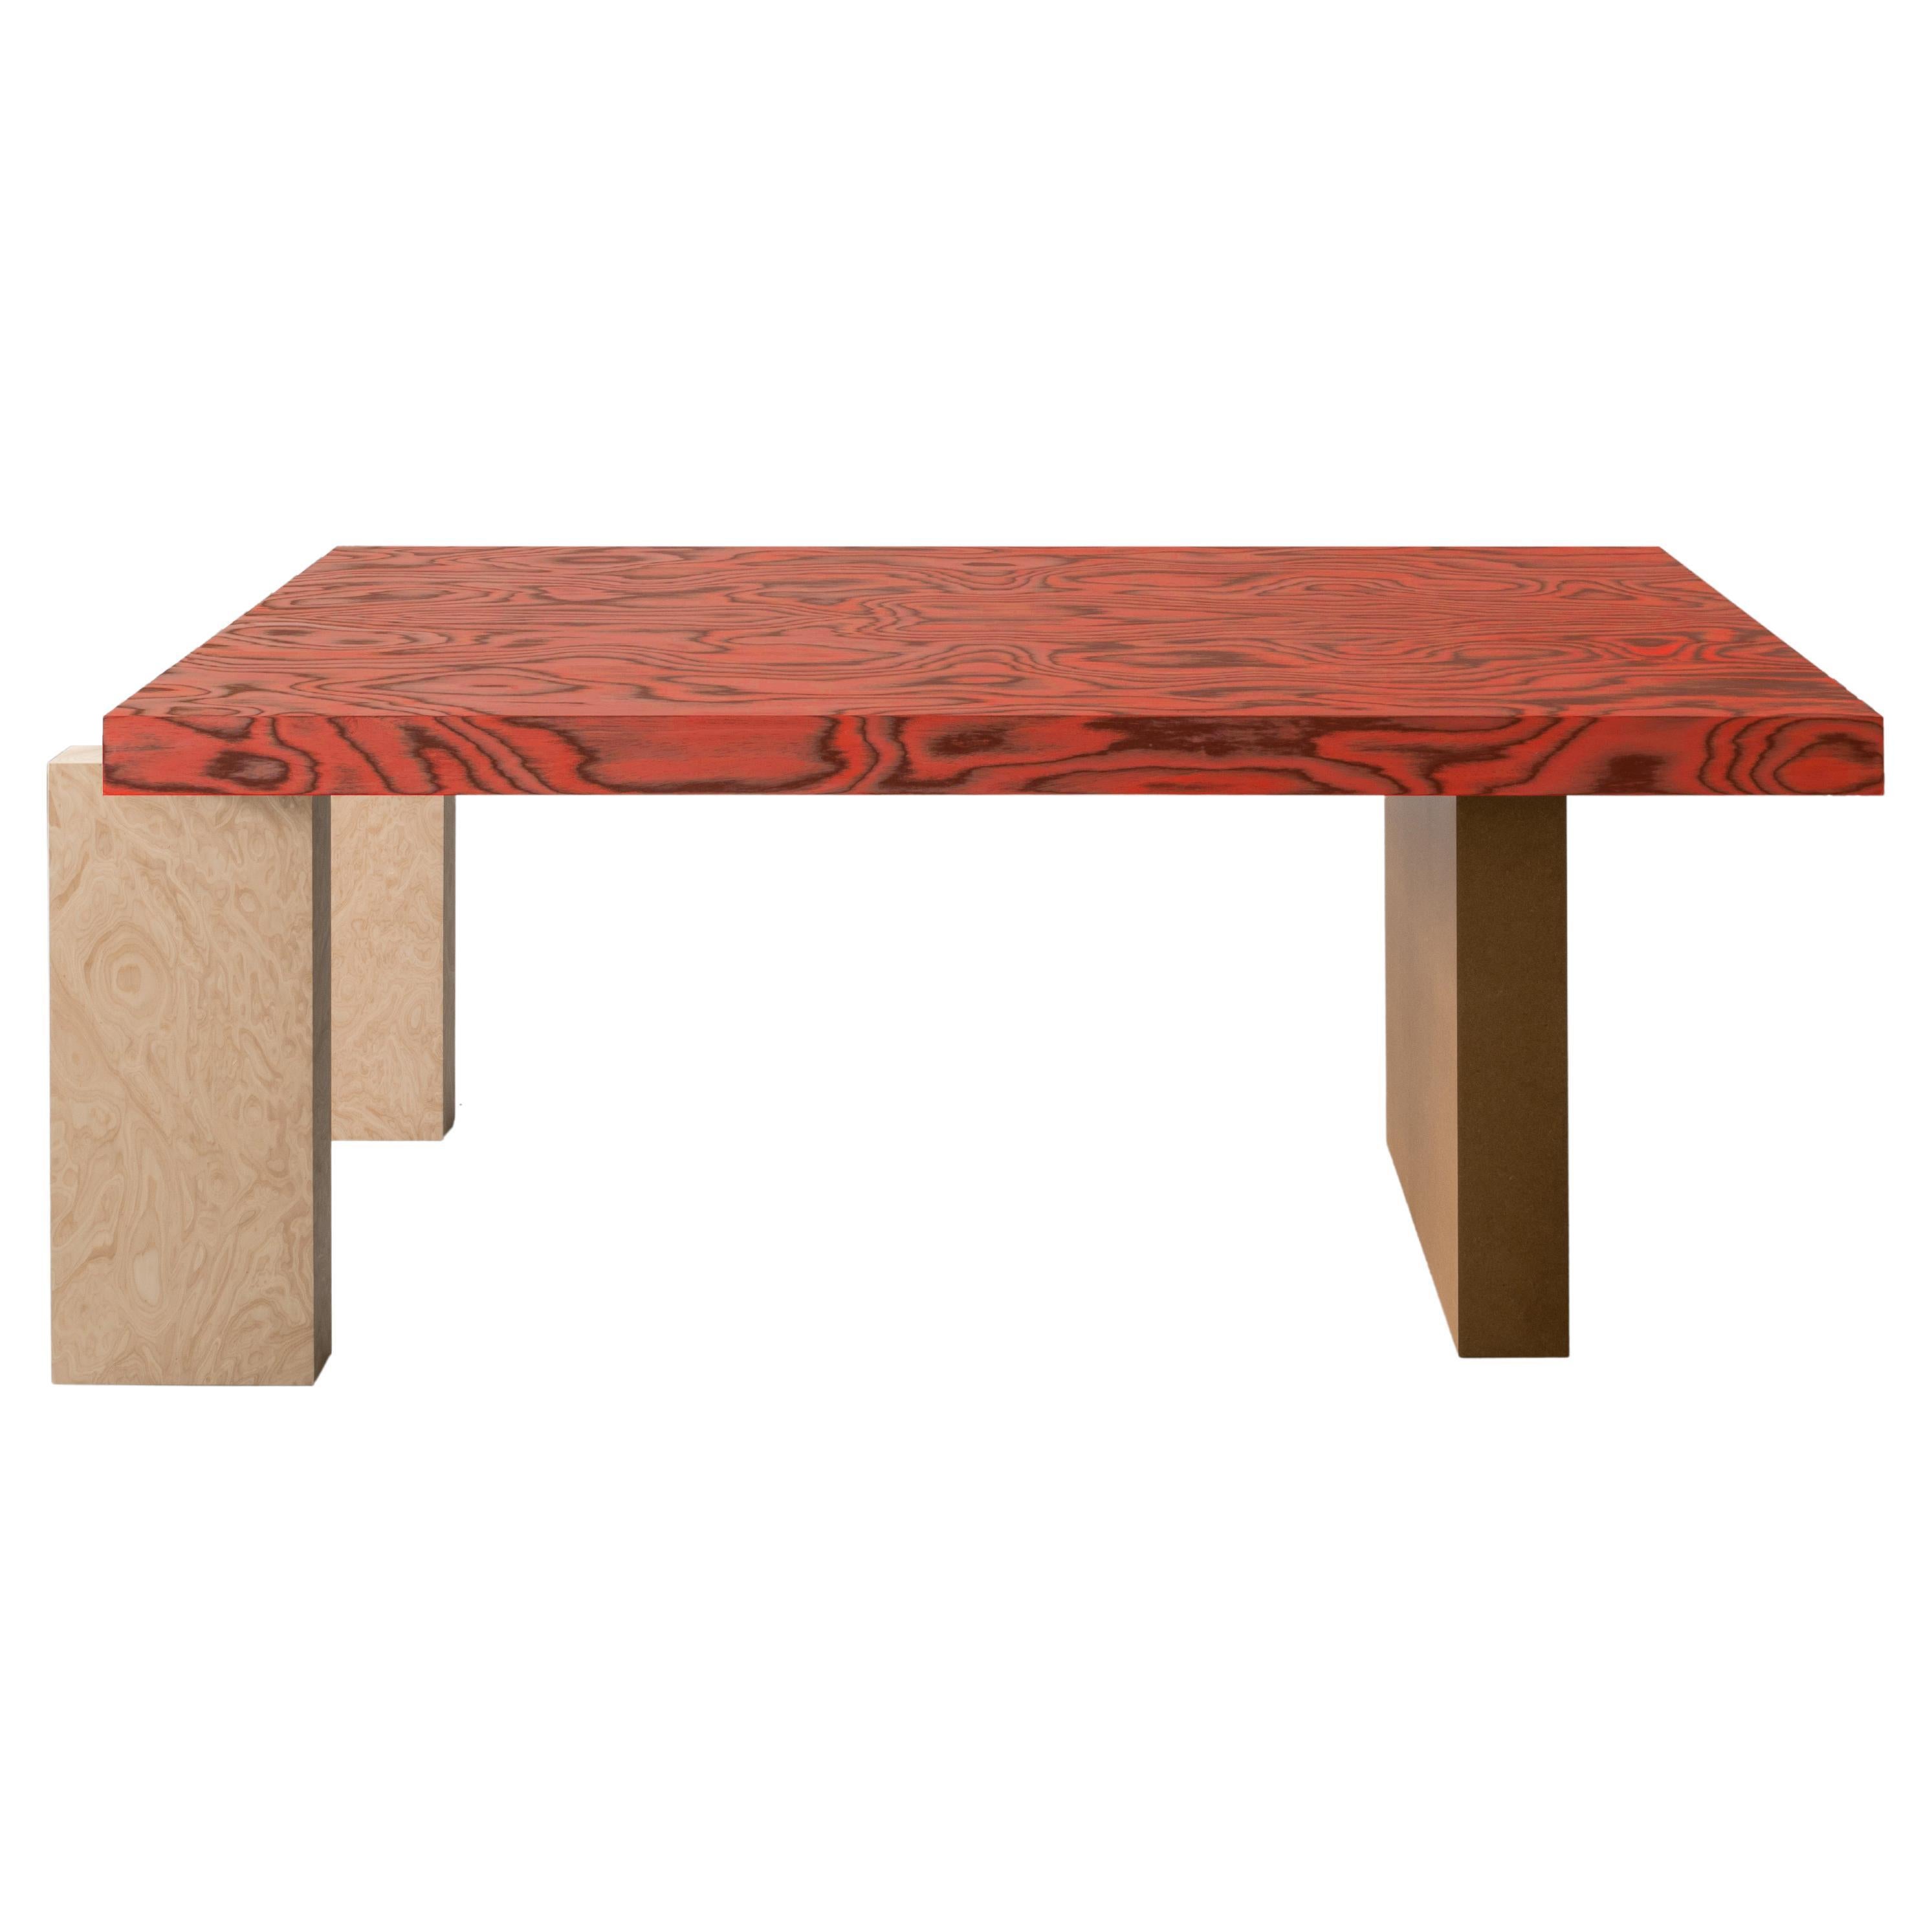 Contemporary Wood Veneered Dining Table. Red ALPI Sottsass Veneered Table Top